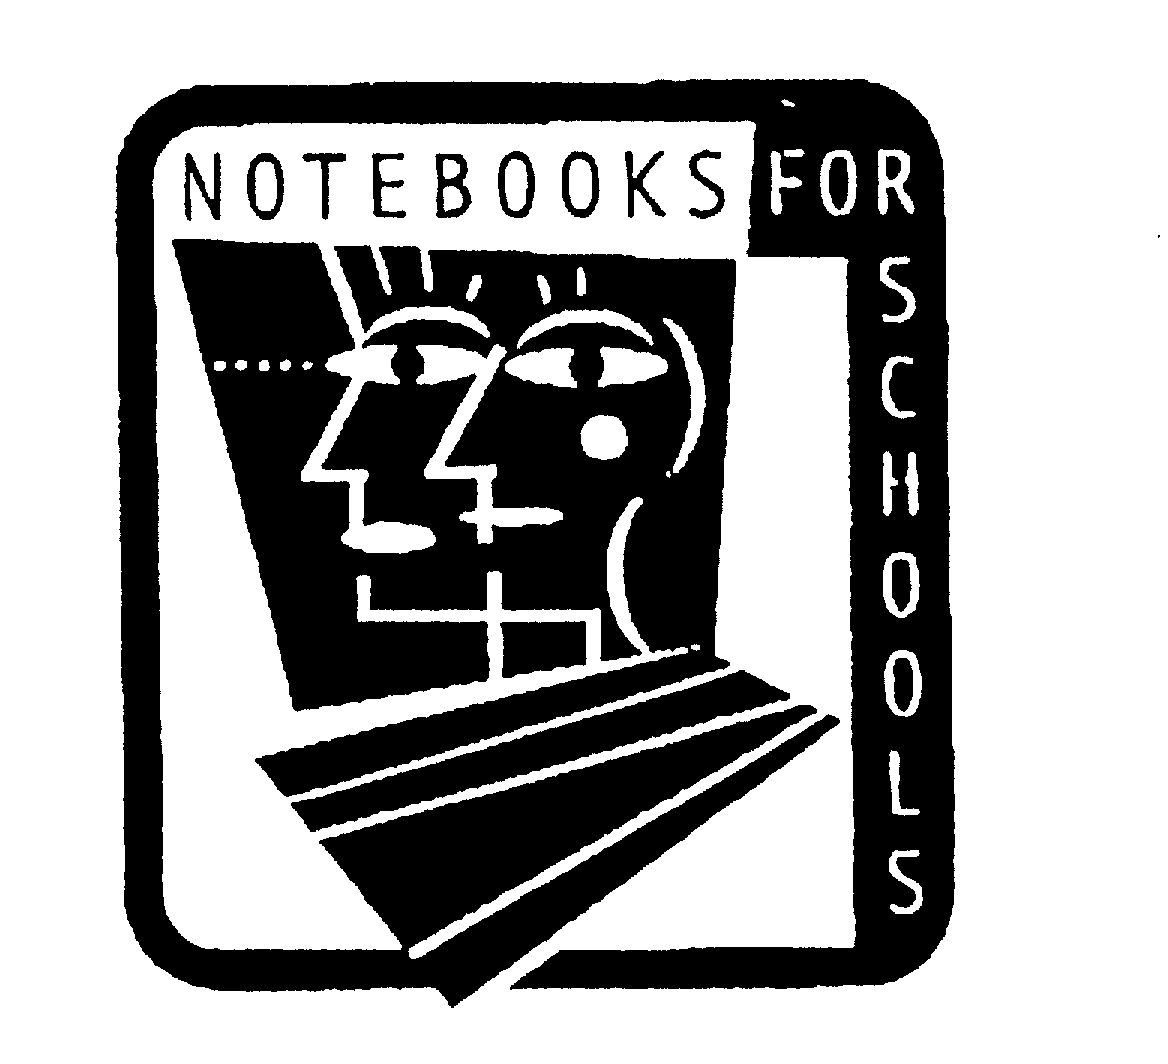  NOTEBOOKS FOR SCHOOLS